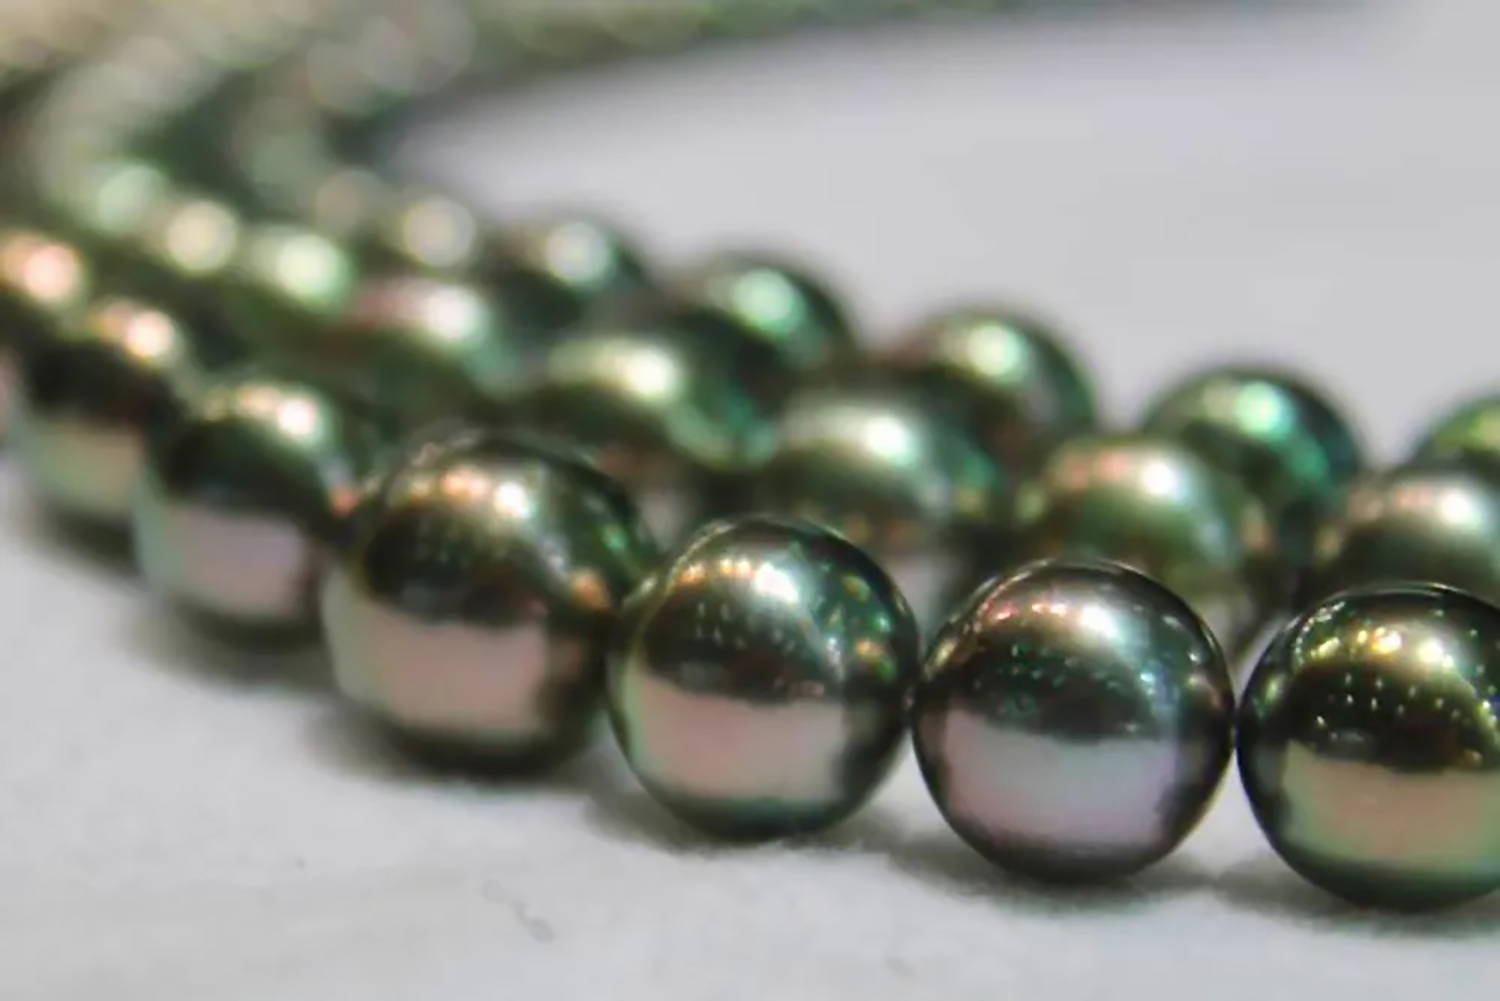 Green and Peacock Colored Tahitian Pearls